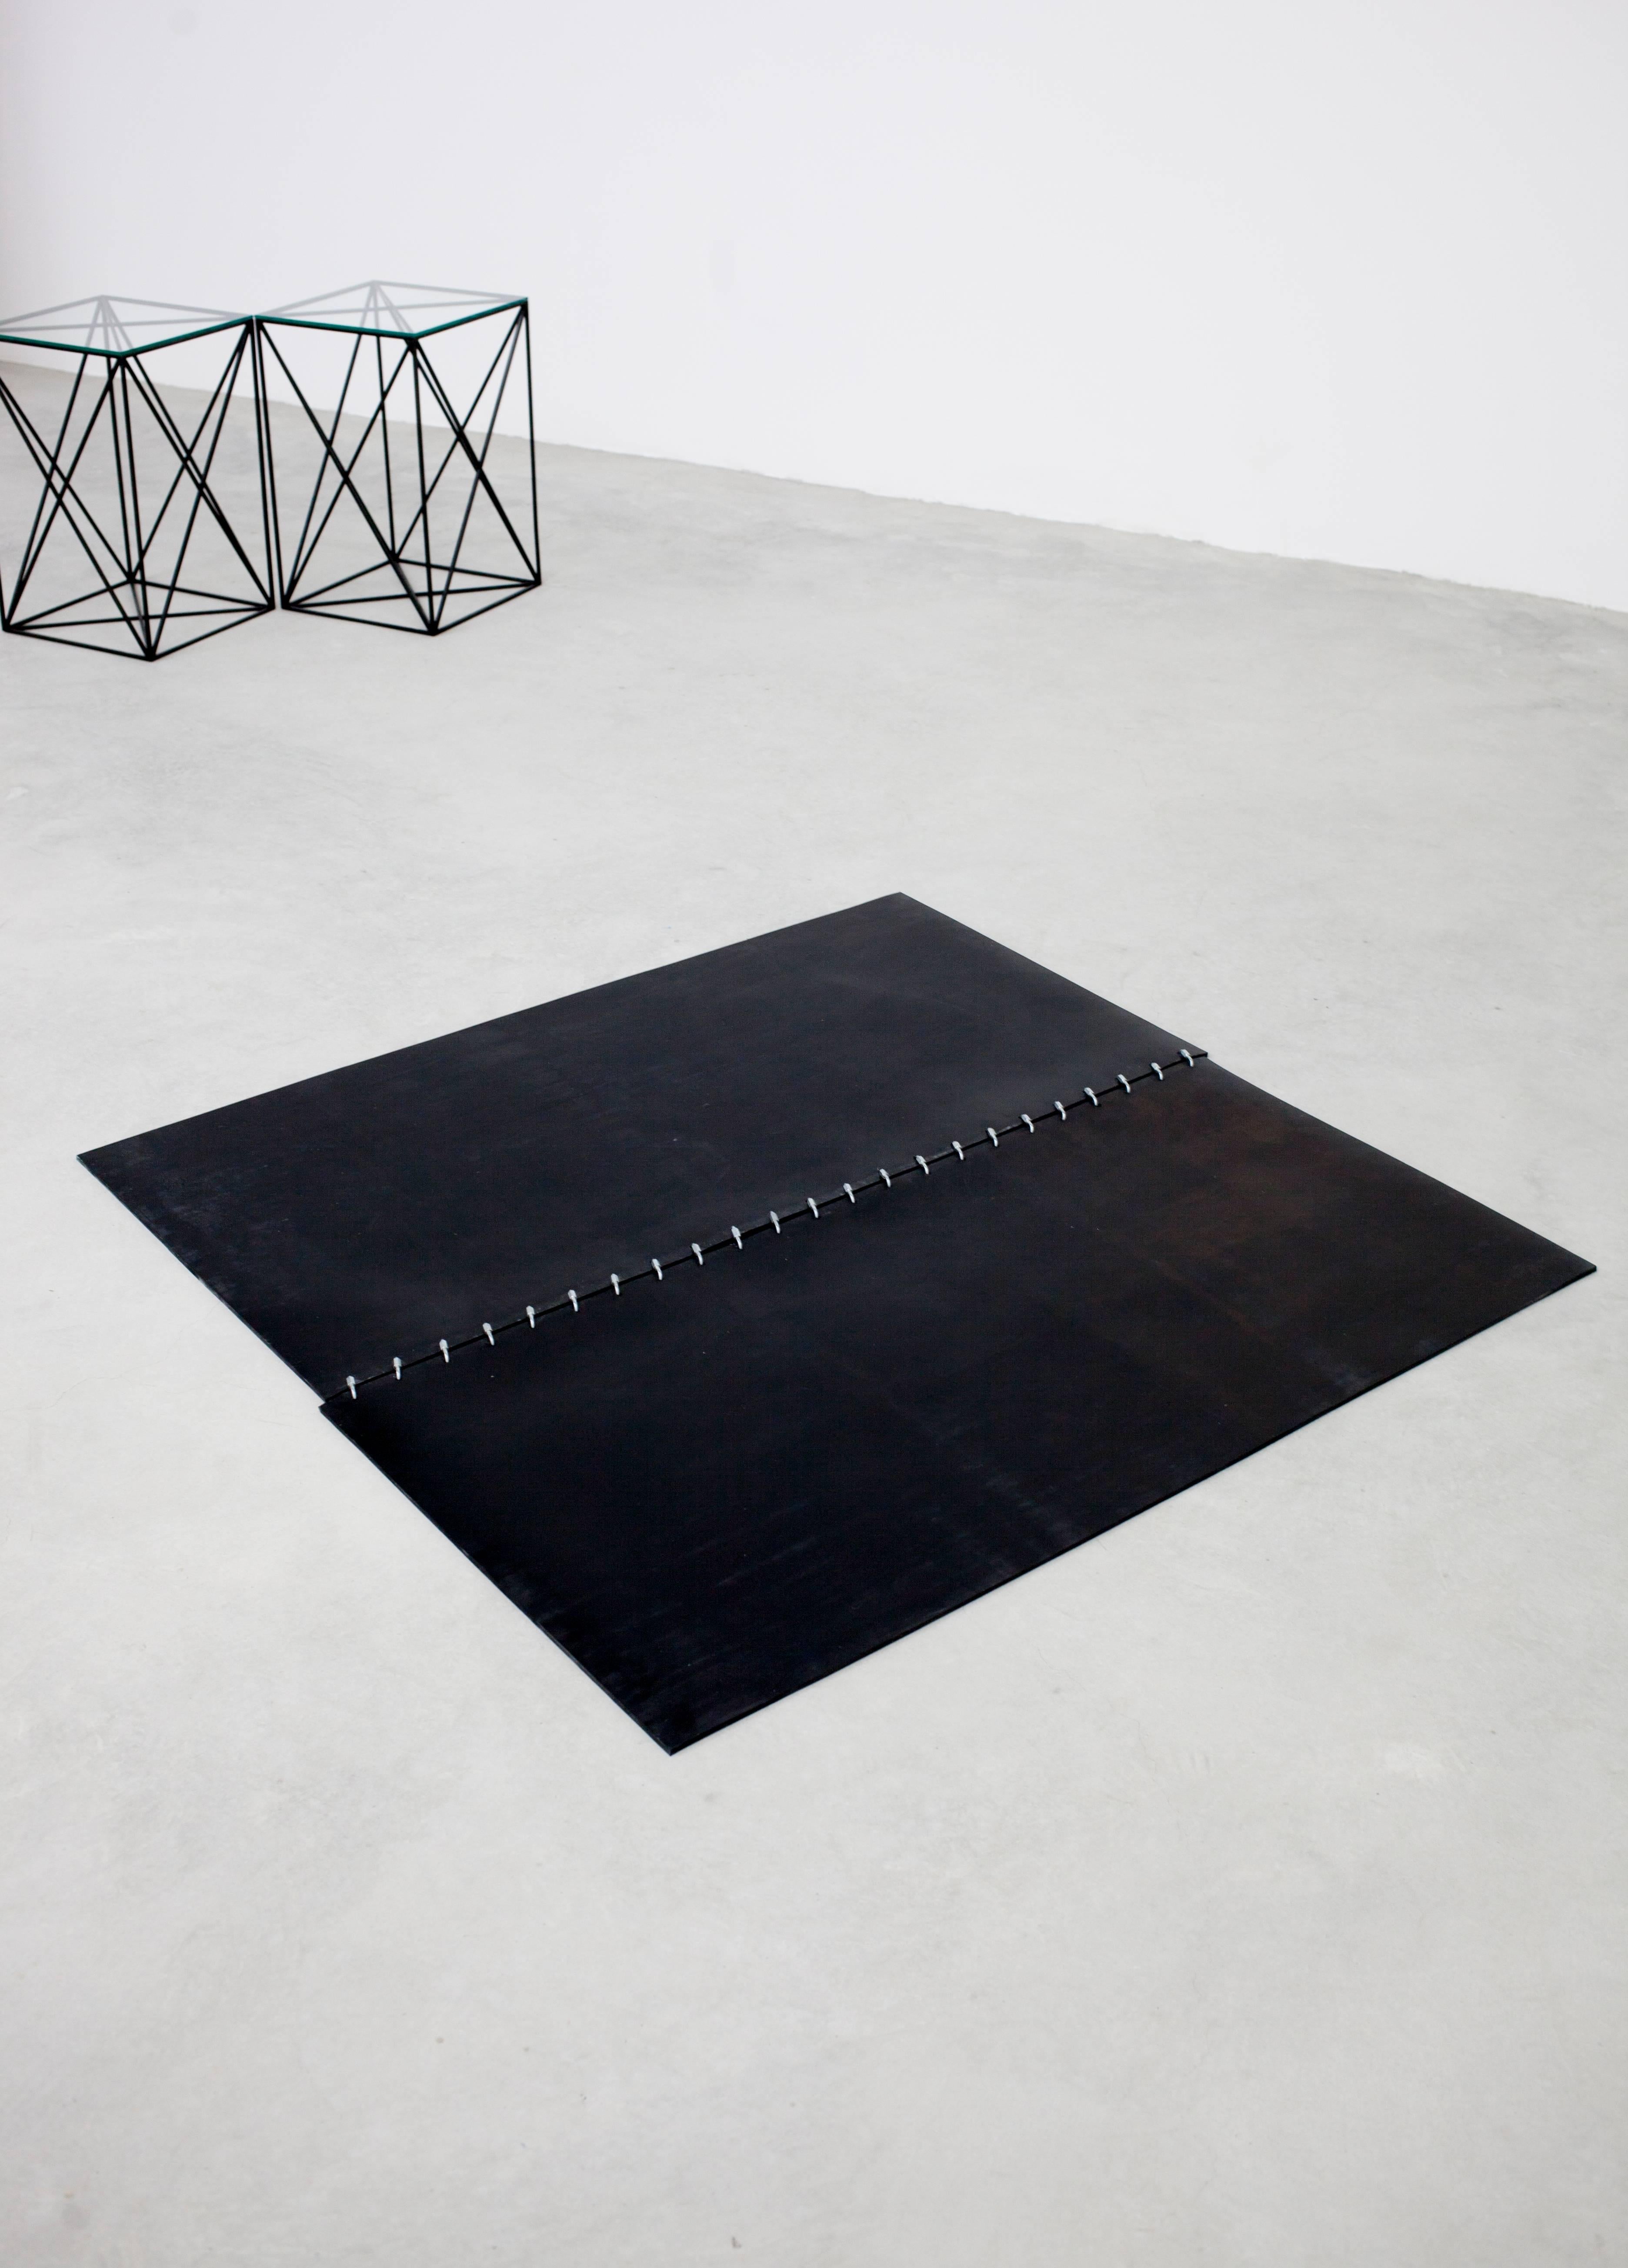 Okipa rug, 2017
Black rubber and stainless steel 
Measures: 4' W x 4' L 
(3' x 8' also shown $4,500 list) 
The piece can be used on the floor or wall. 

Made to order $190 SF. Lead time 2-4 weeks.
Each piece is handmade by Material Lust in